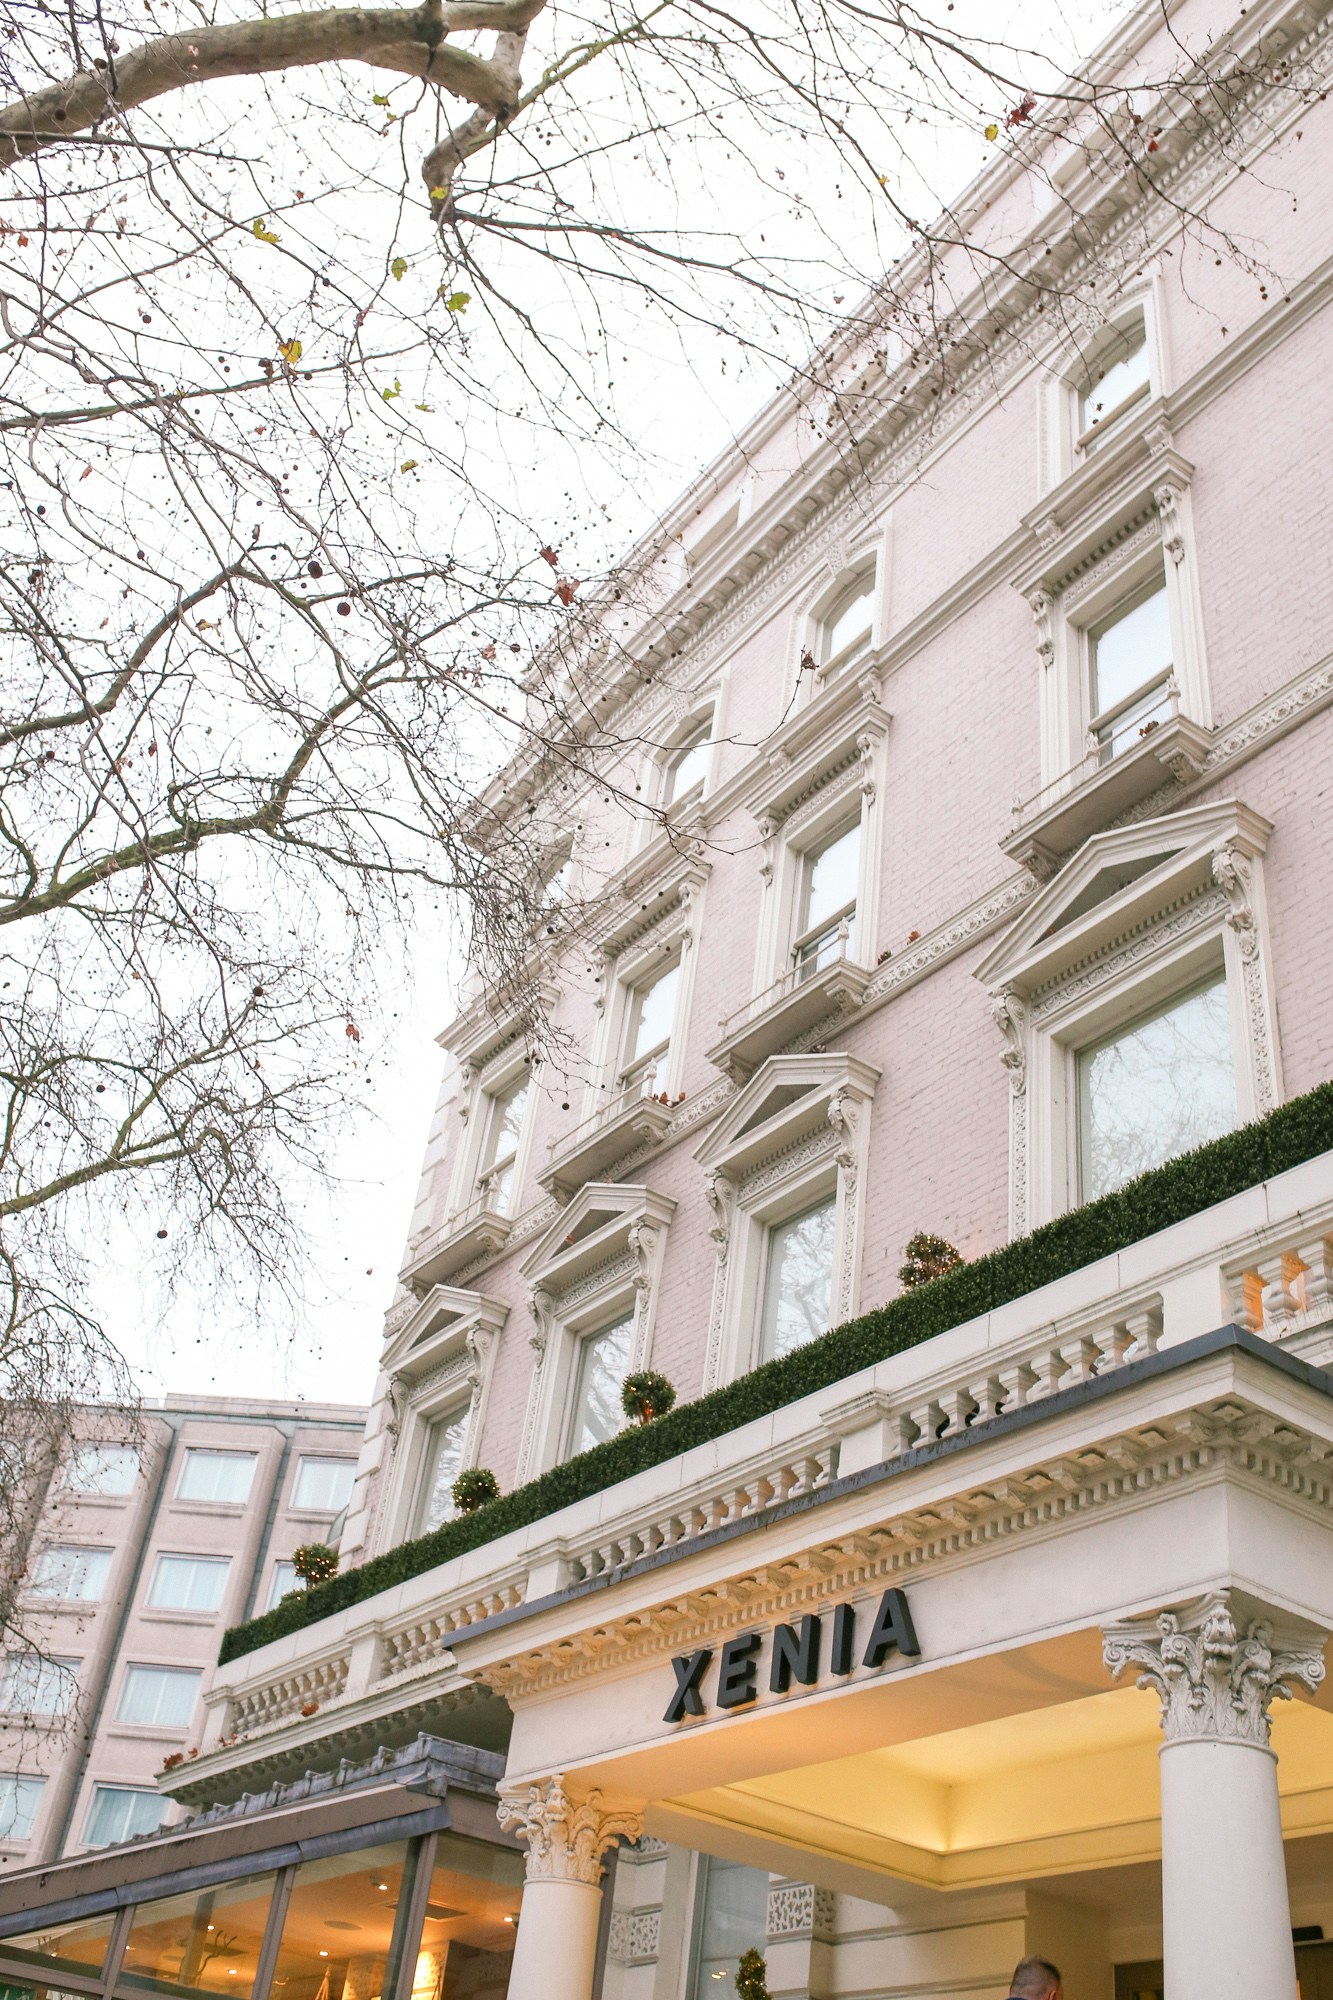 Hotel Xenia Autograph Collection London is located in a 19th Century Townhouse on Cromwell Road in Kensington. Check out my post for a full review of this boutique-style hotel from Marriott.